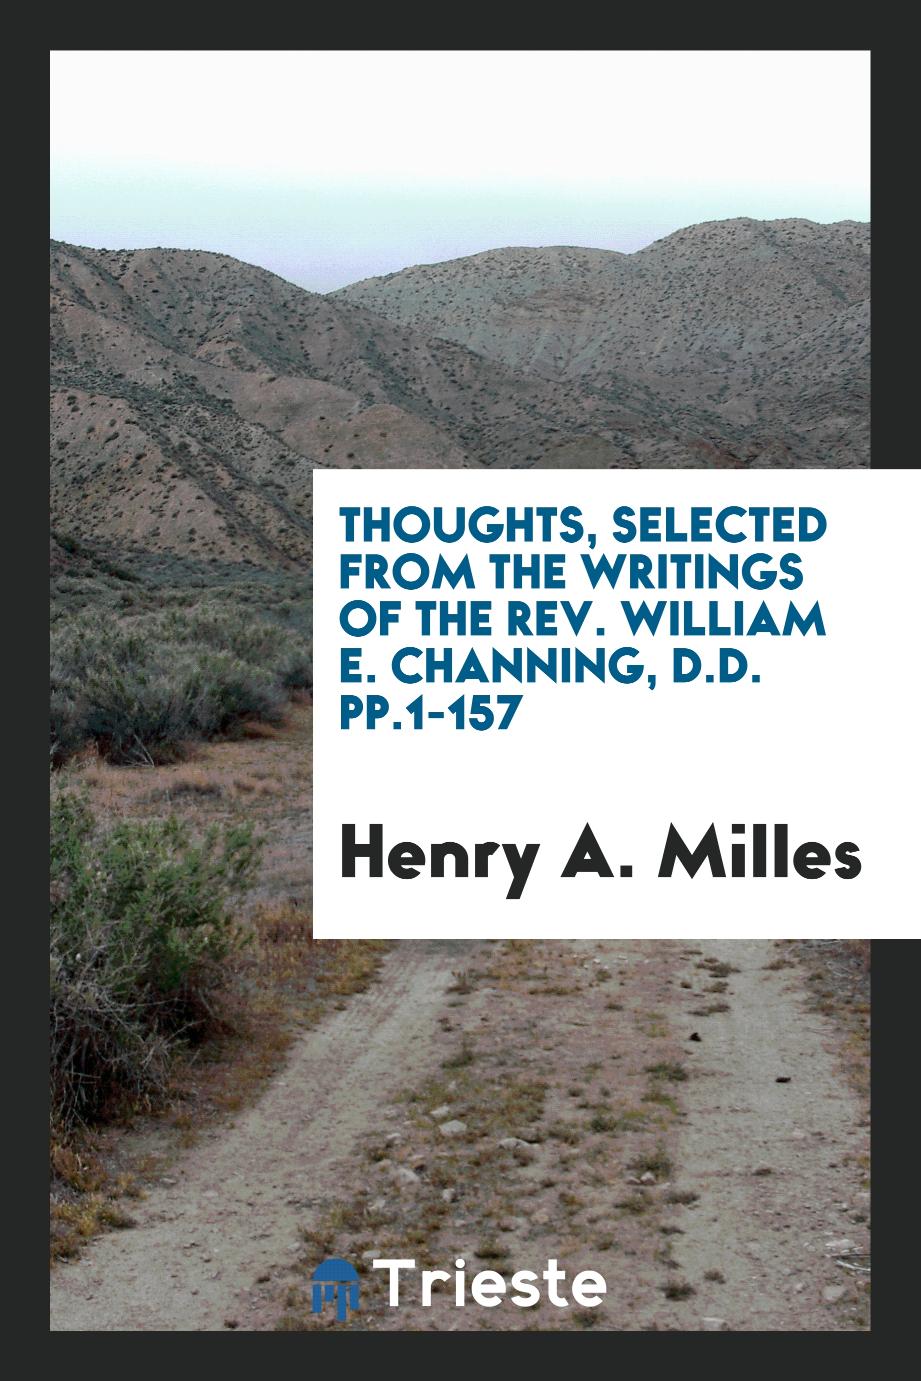 Thoughts, Selected from the Writings of the Rev. William E. Channing, D.D. pp.1-157